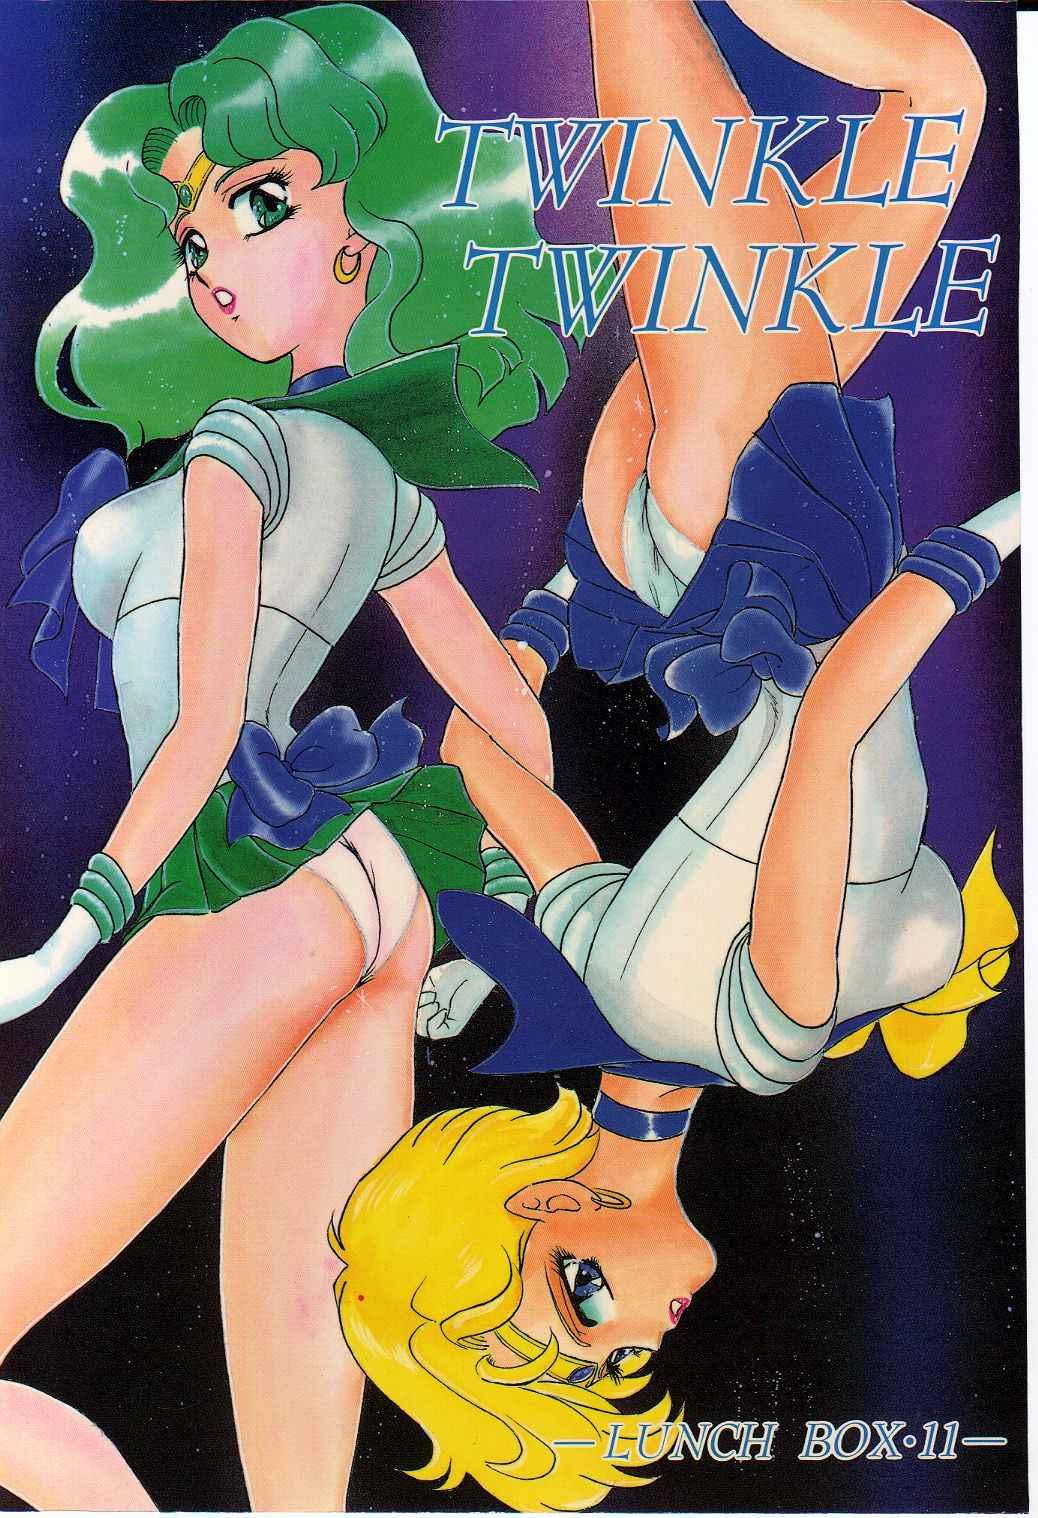 Sexteen Lunch Box 11 - Twinkle Twinkle - Sailor moon Adult - Page 1